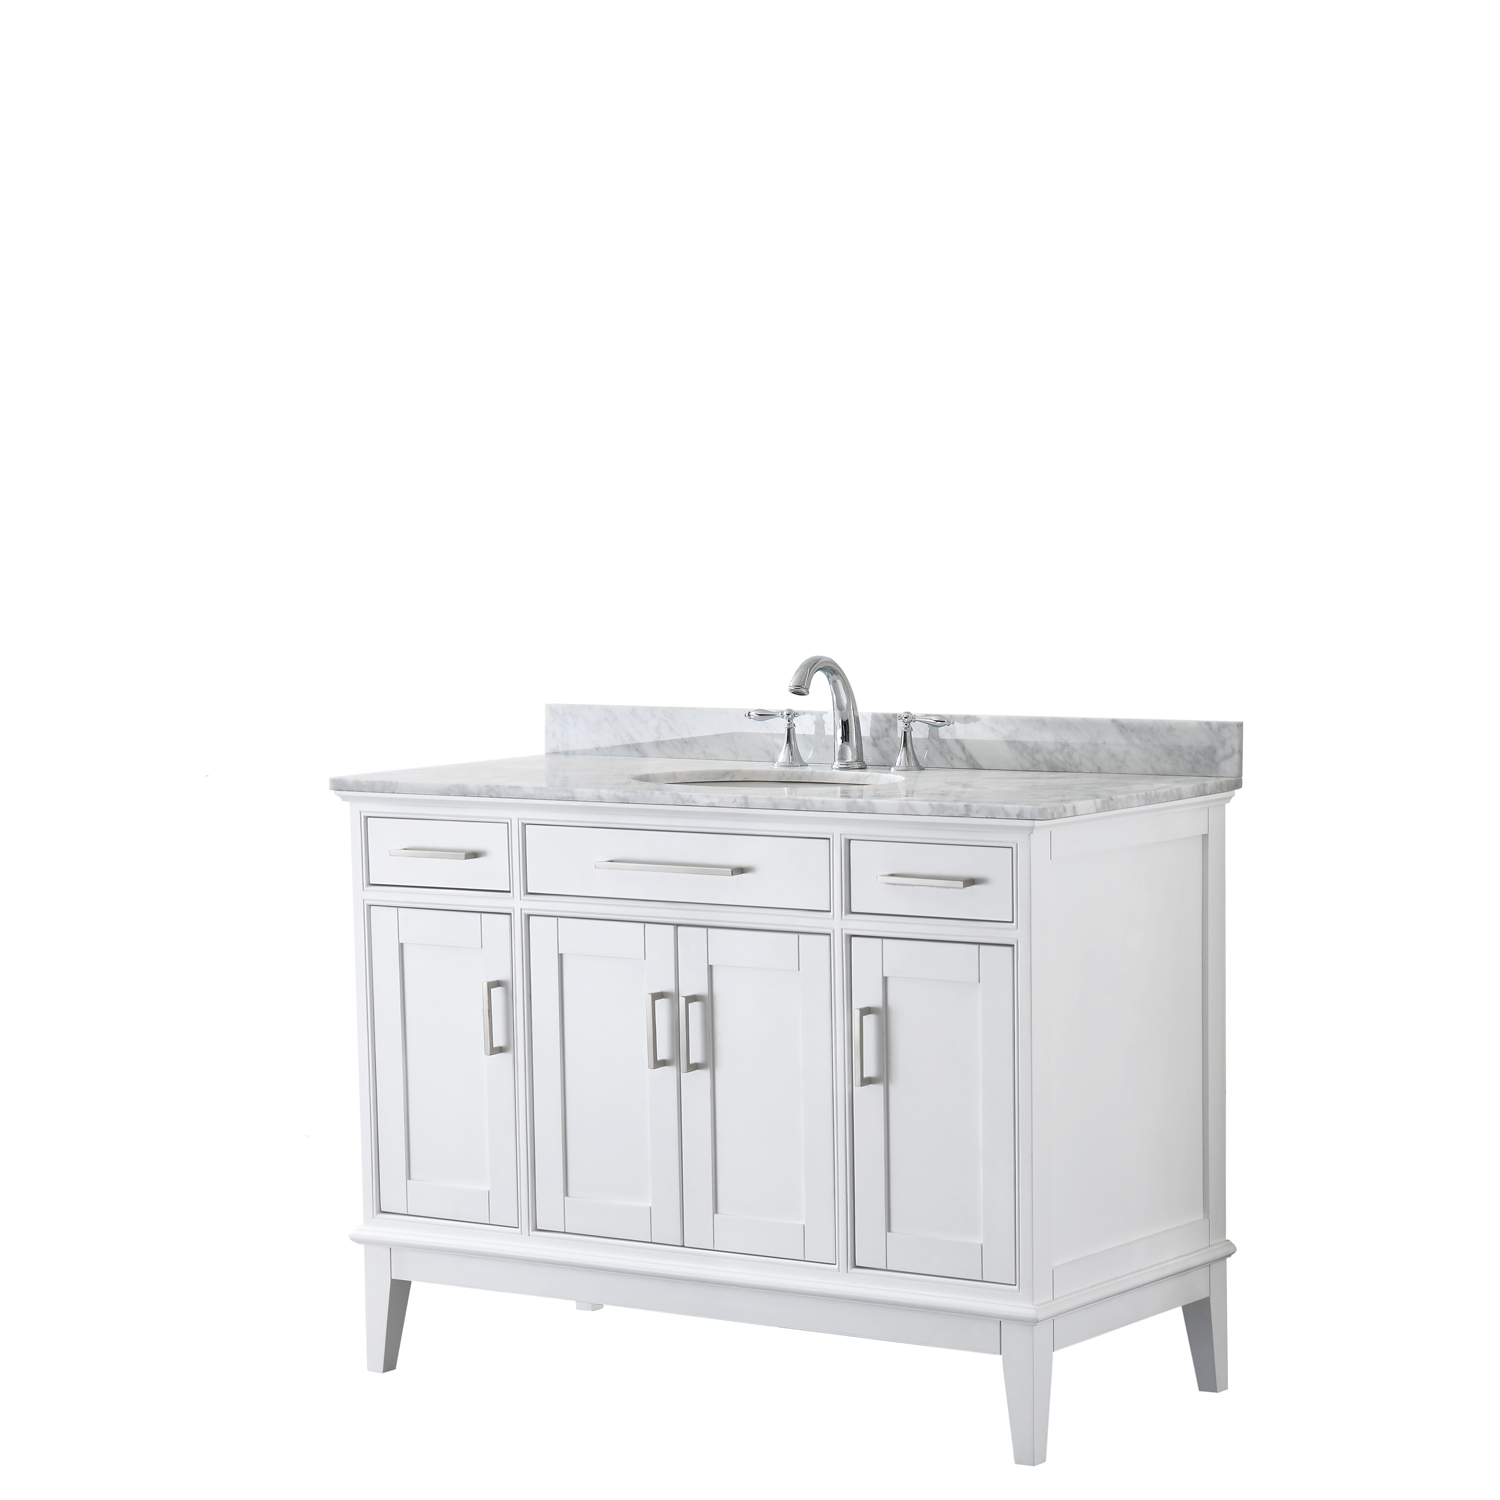 Contemporary 48" Single Bathroom Vanity in White, White Carrara Marble Countertop with Undermount Sink, and Mirror Options